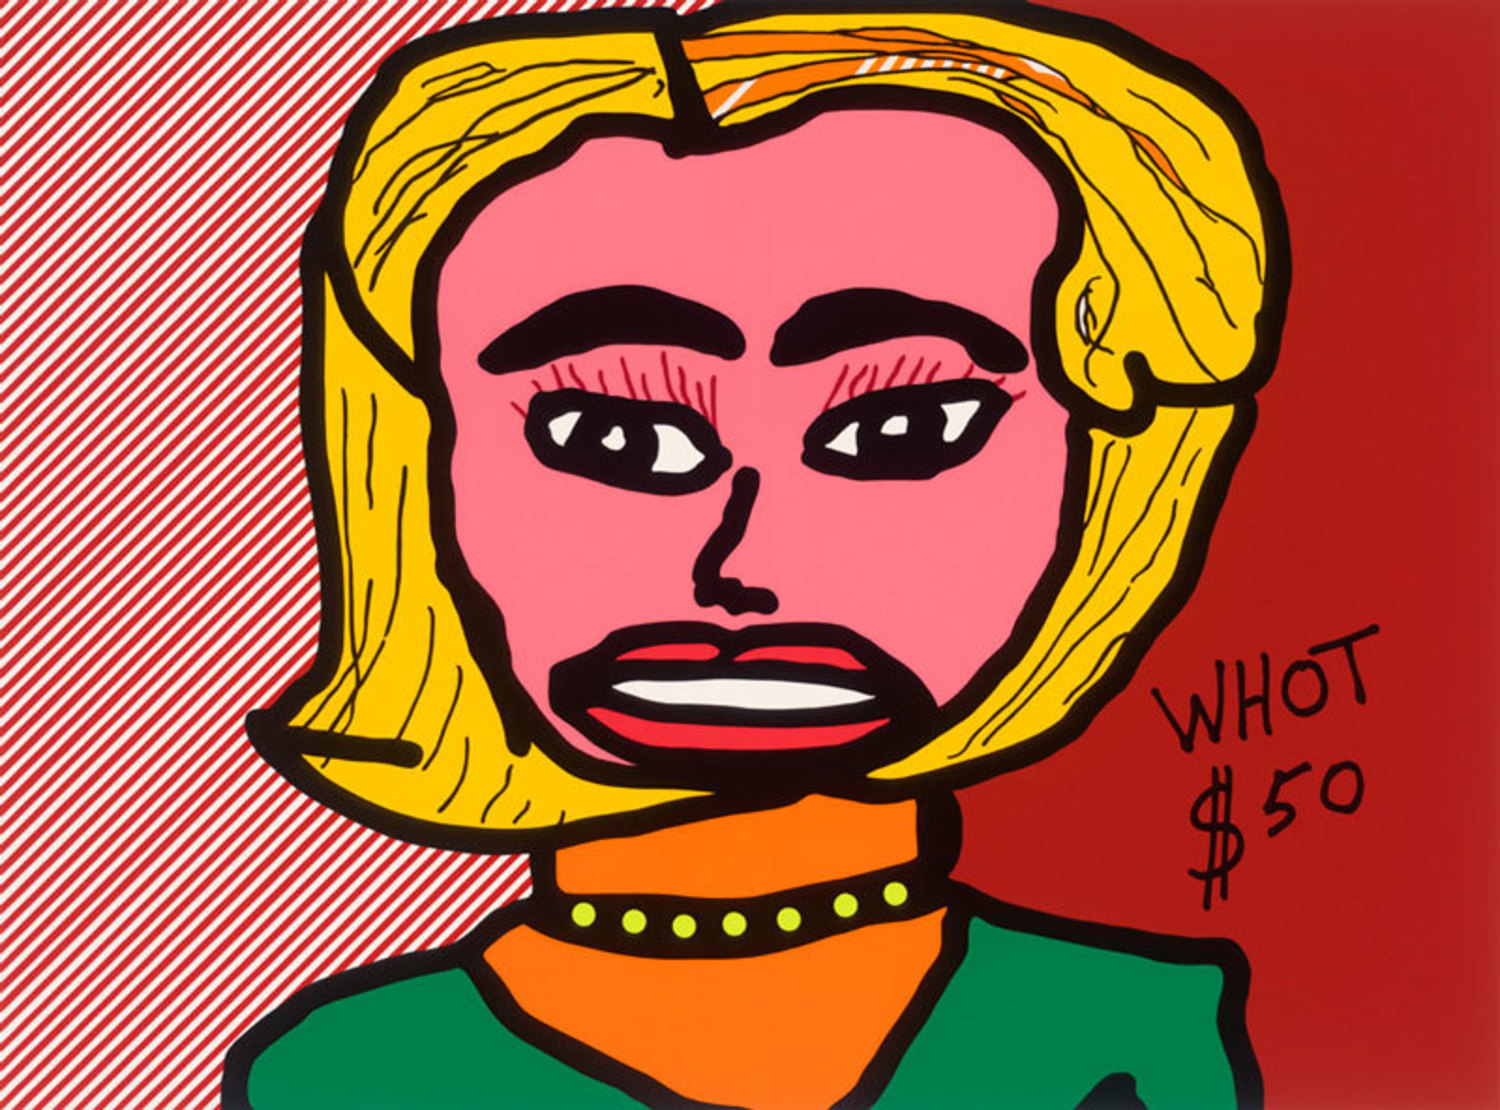 Whot $50 – Limited Art Print by Ringo Starr